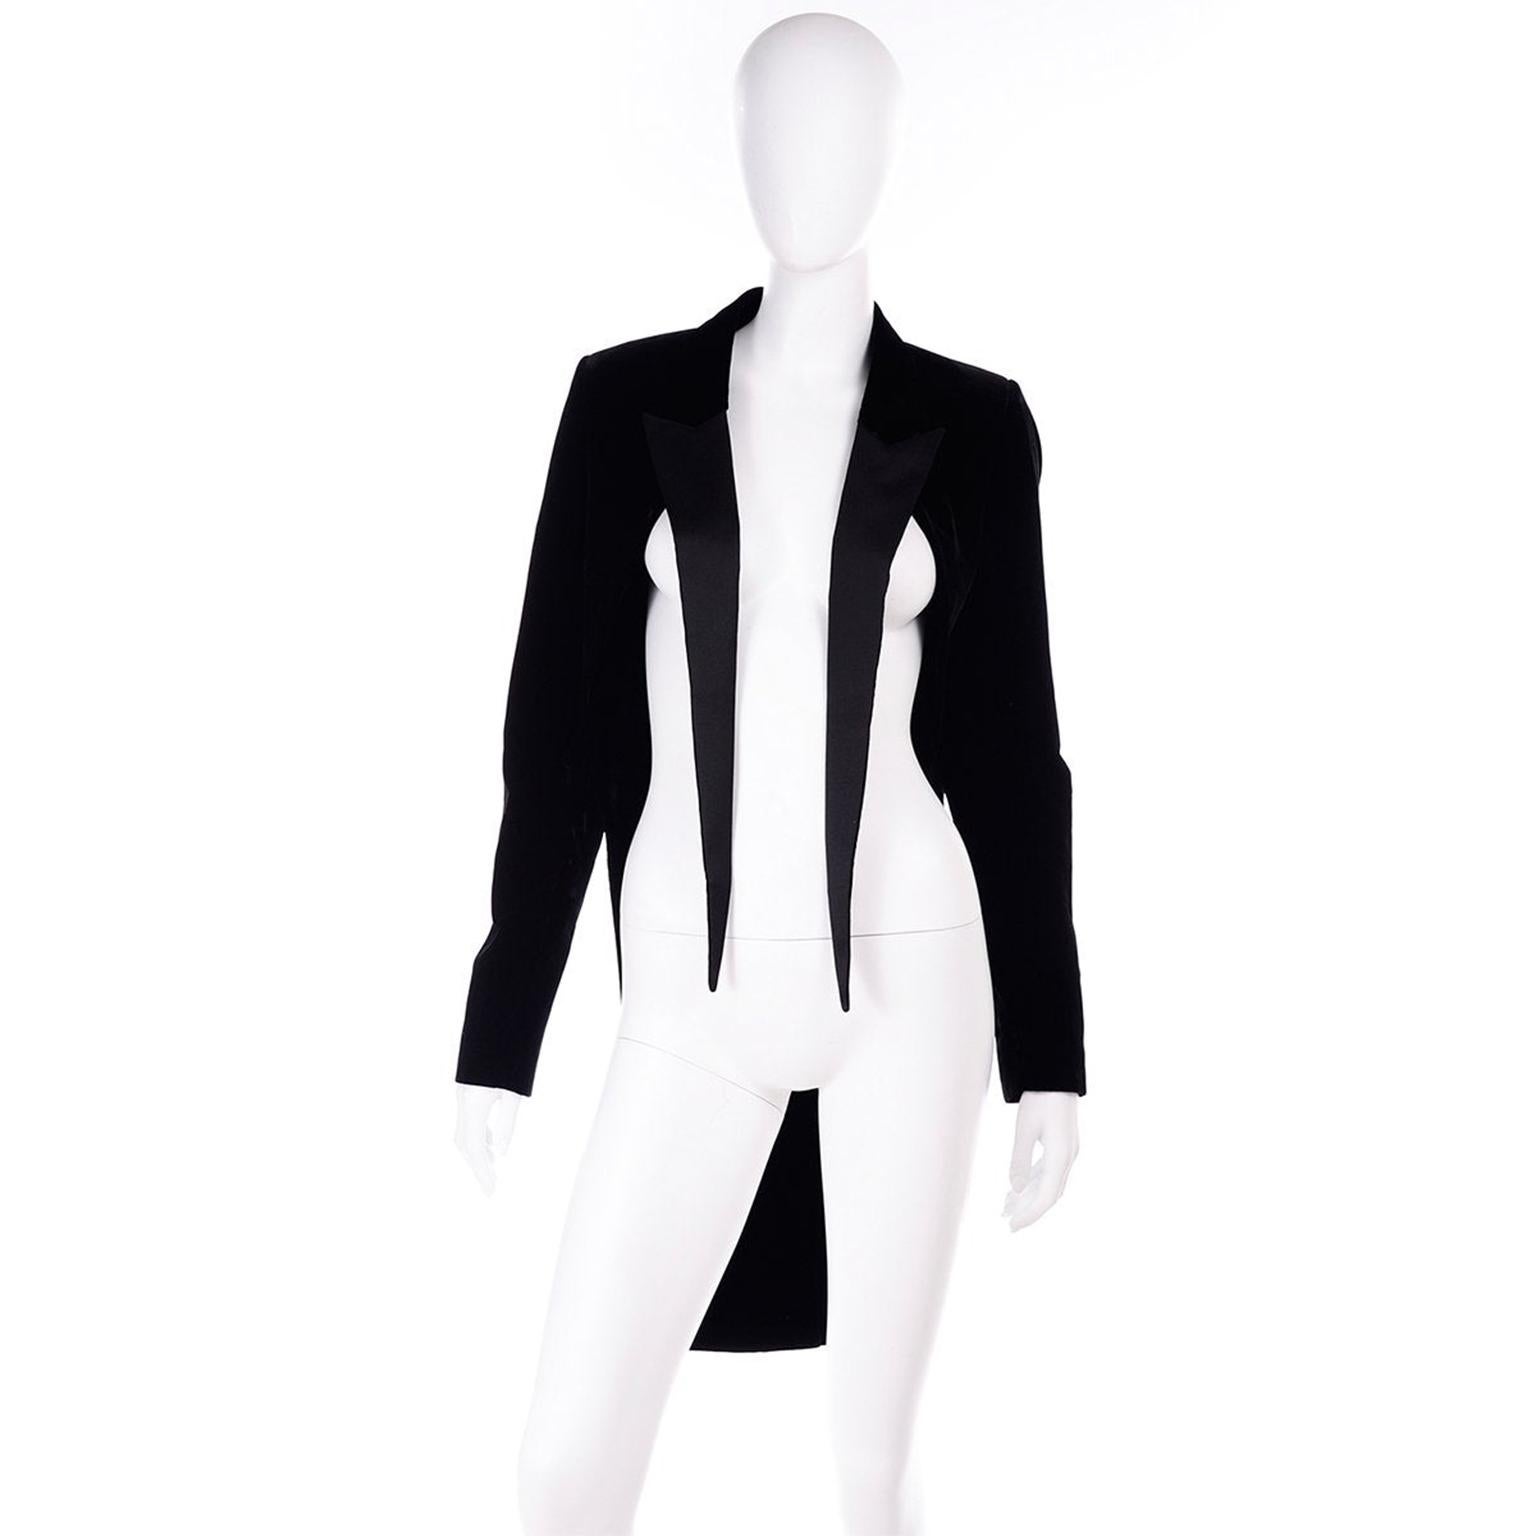 This is a fabulous contemporary Saint Laurent black velvet and satin tuxedo style cutaway jacket. This jacket features tails and flyaway satin peaked lapels, which form the main detail of the front. This open front jacket has long sleeves and a back